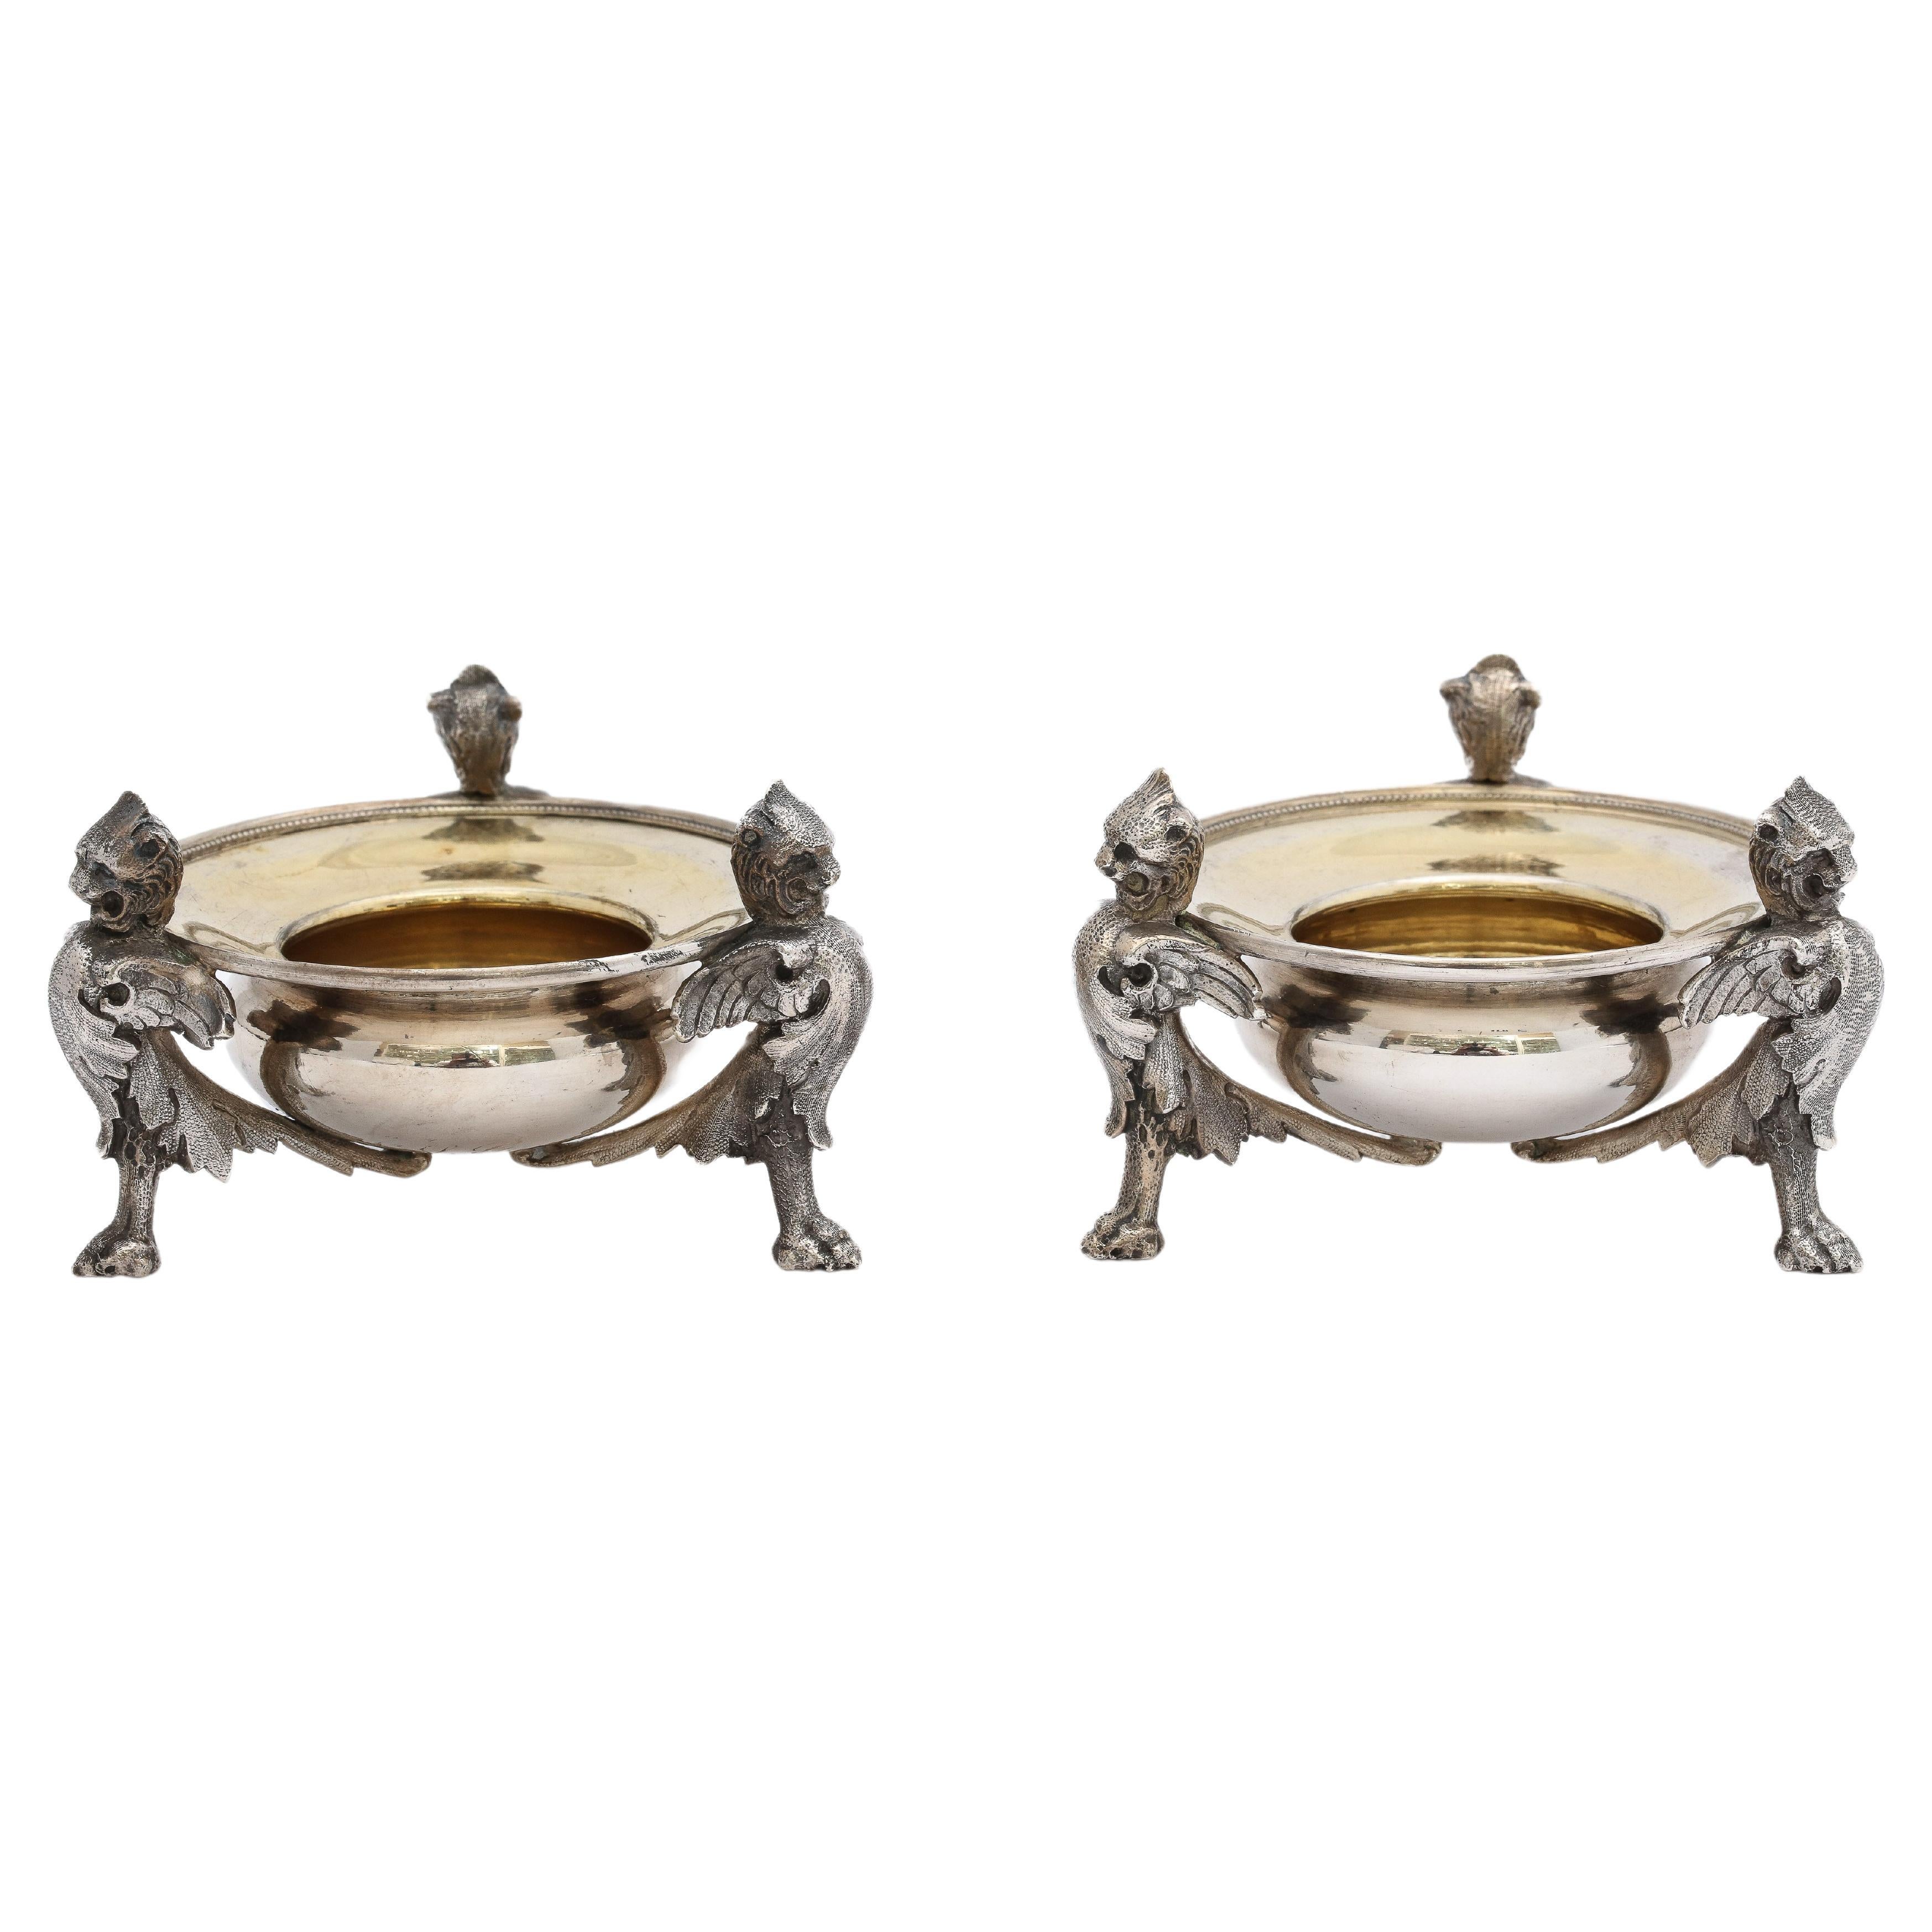 Pair of Neoclassical-Style Parcel Gilt Coin Silver Footed Salt Cellars By Gorham For Sale